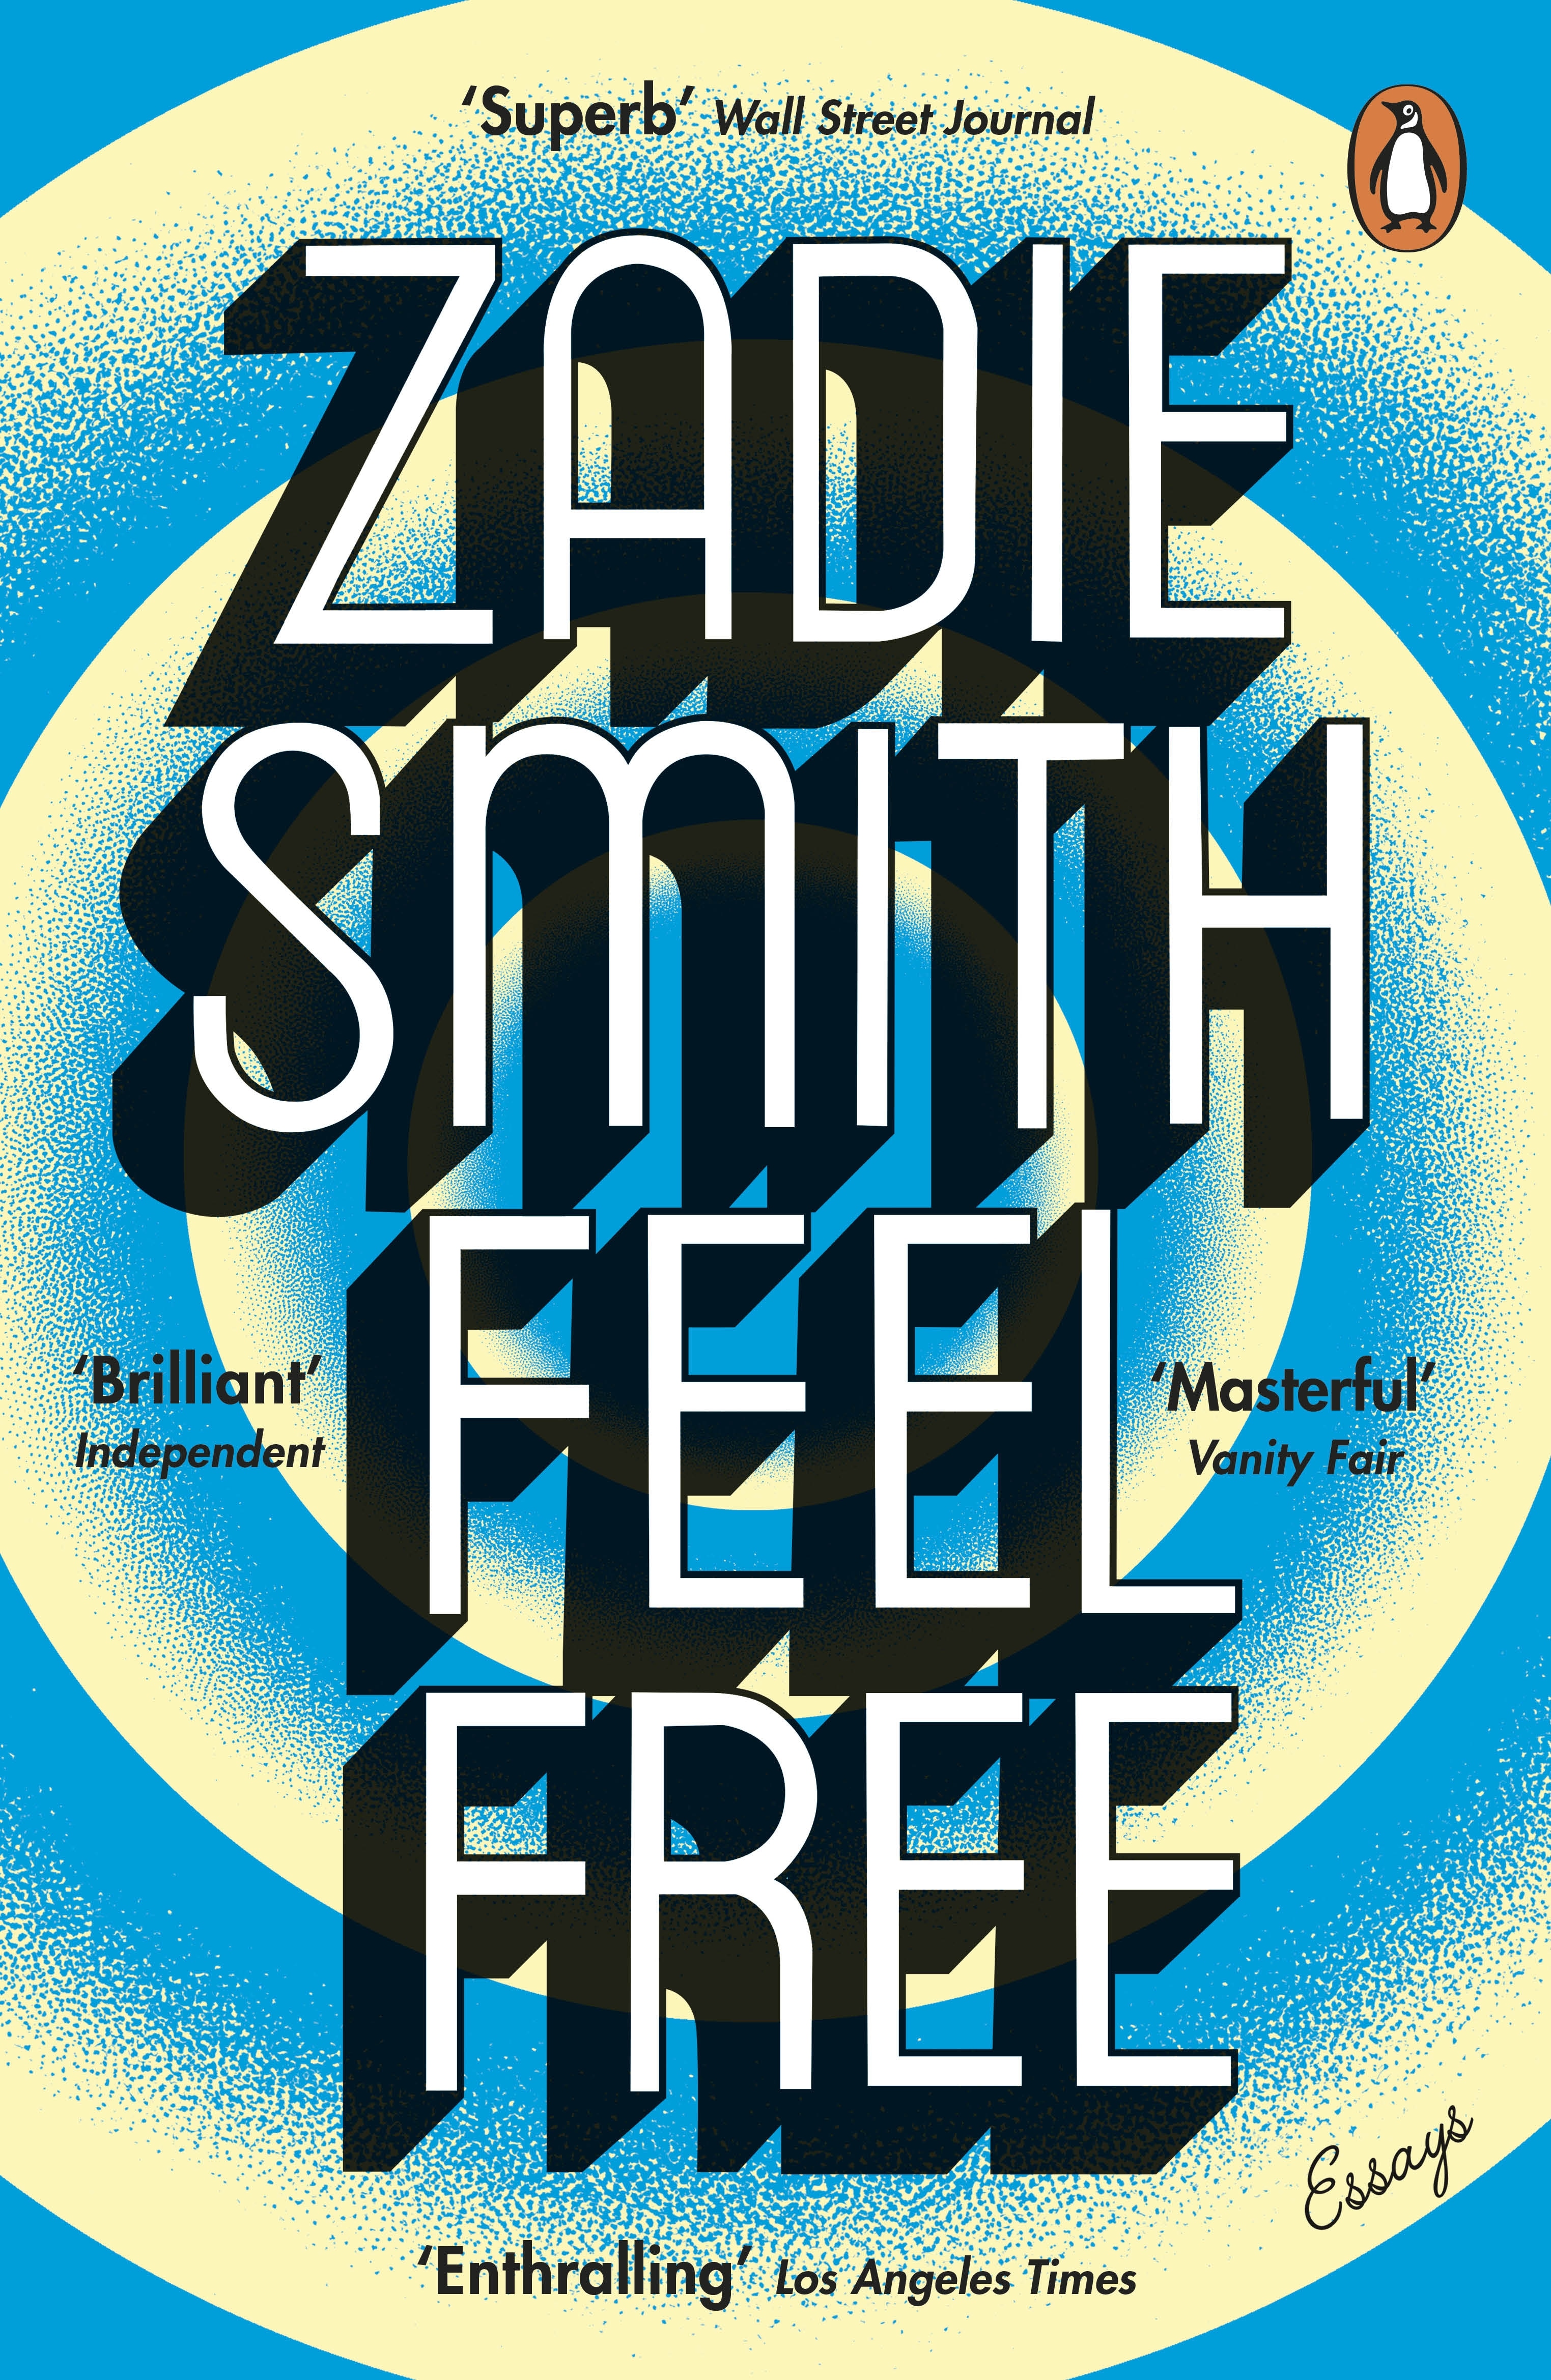 Book “Feel Free” by Zadie Smith — March 7, 2019